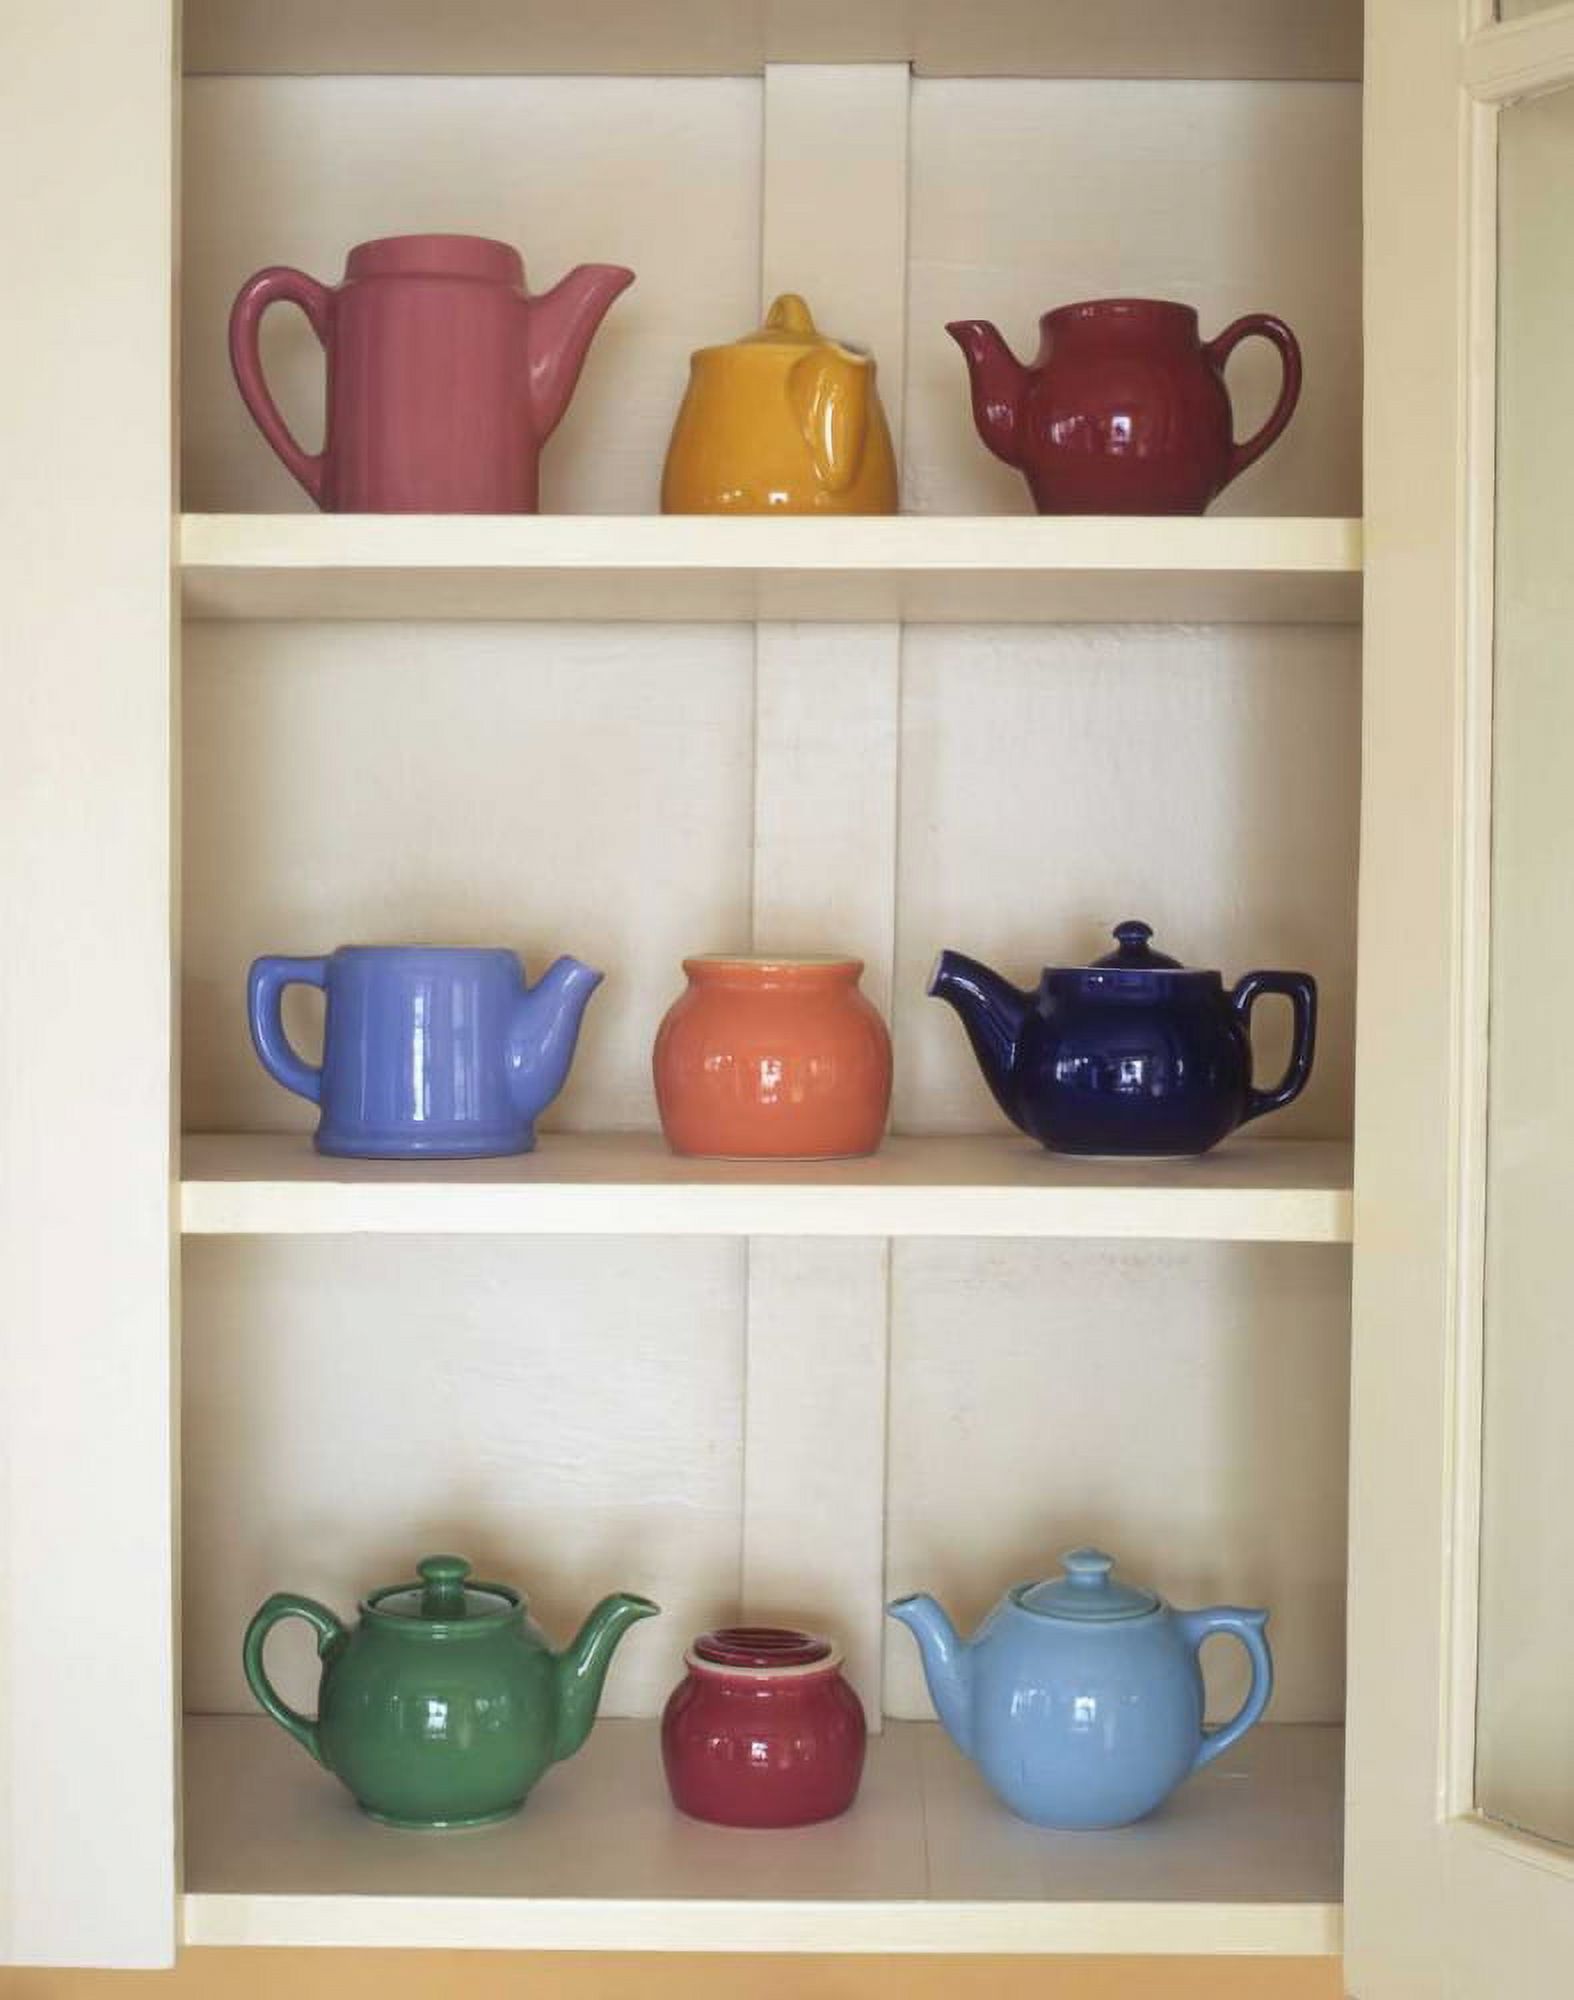 Antique ceramic teapots and sugar bowls in cupboard by Steve Terrill (18 x 24) - image 1 of 1